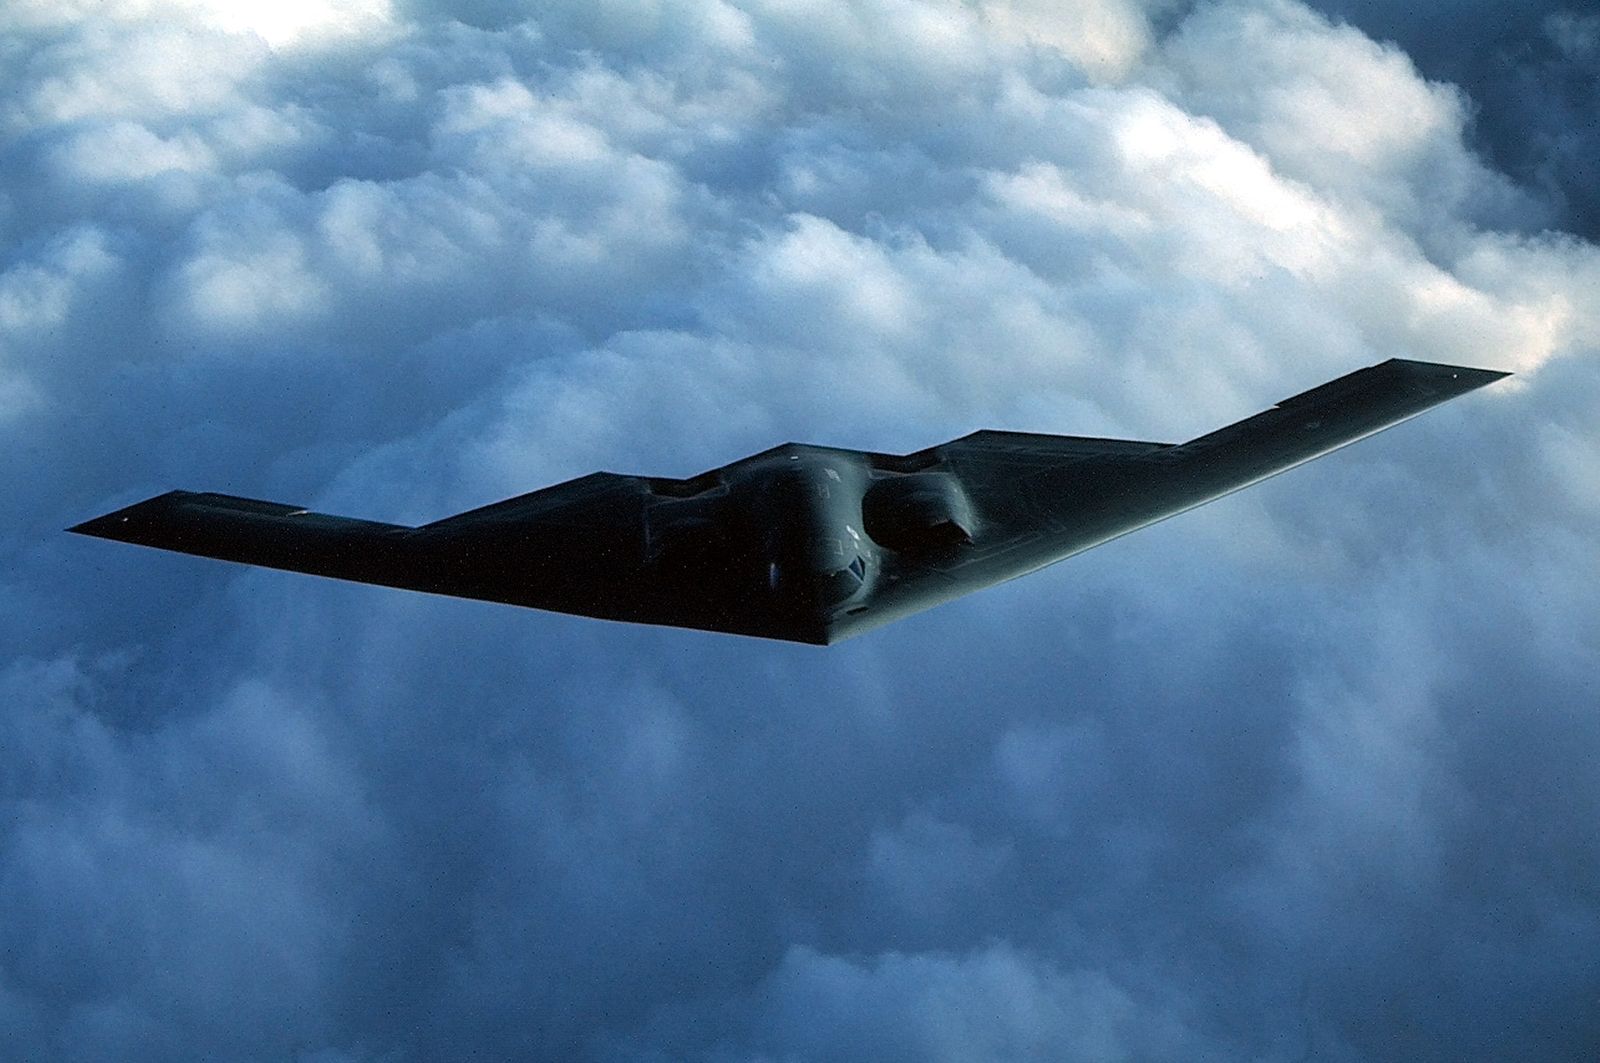 How B-2 Stealth Bomber Pilots Are Always Ready for 40-Hour Bombing